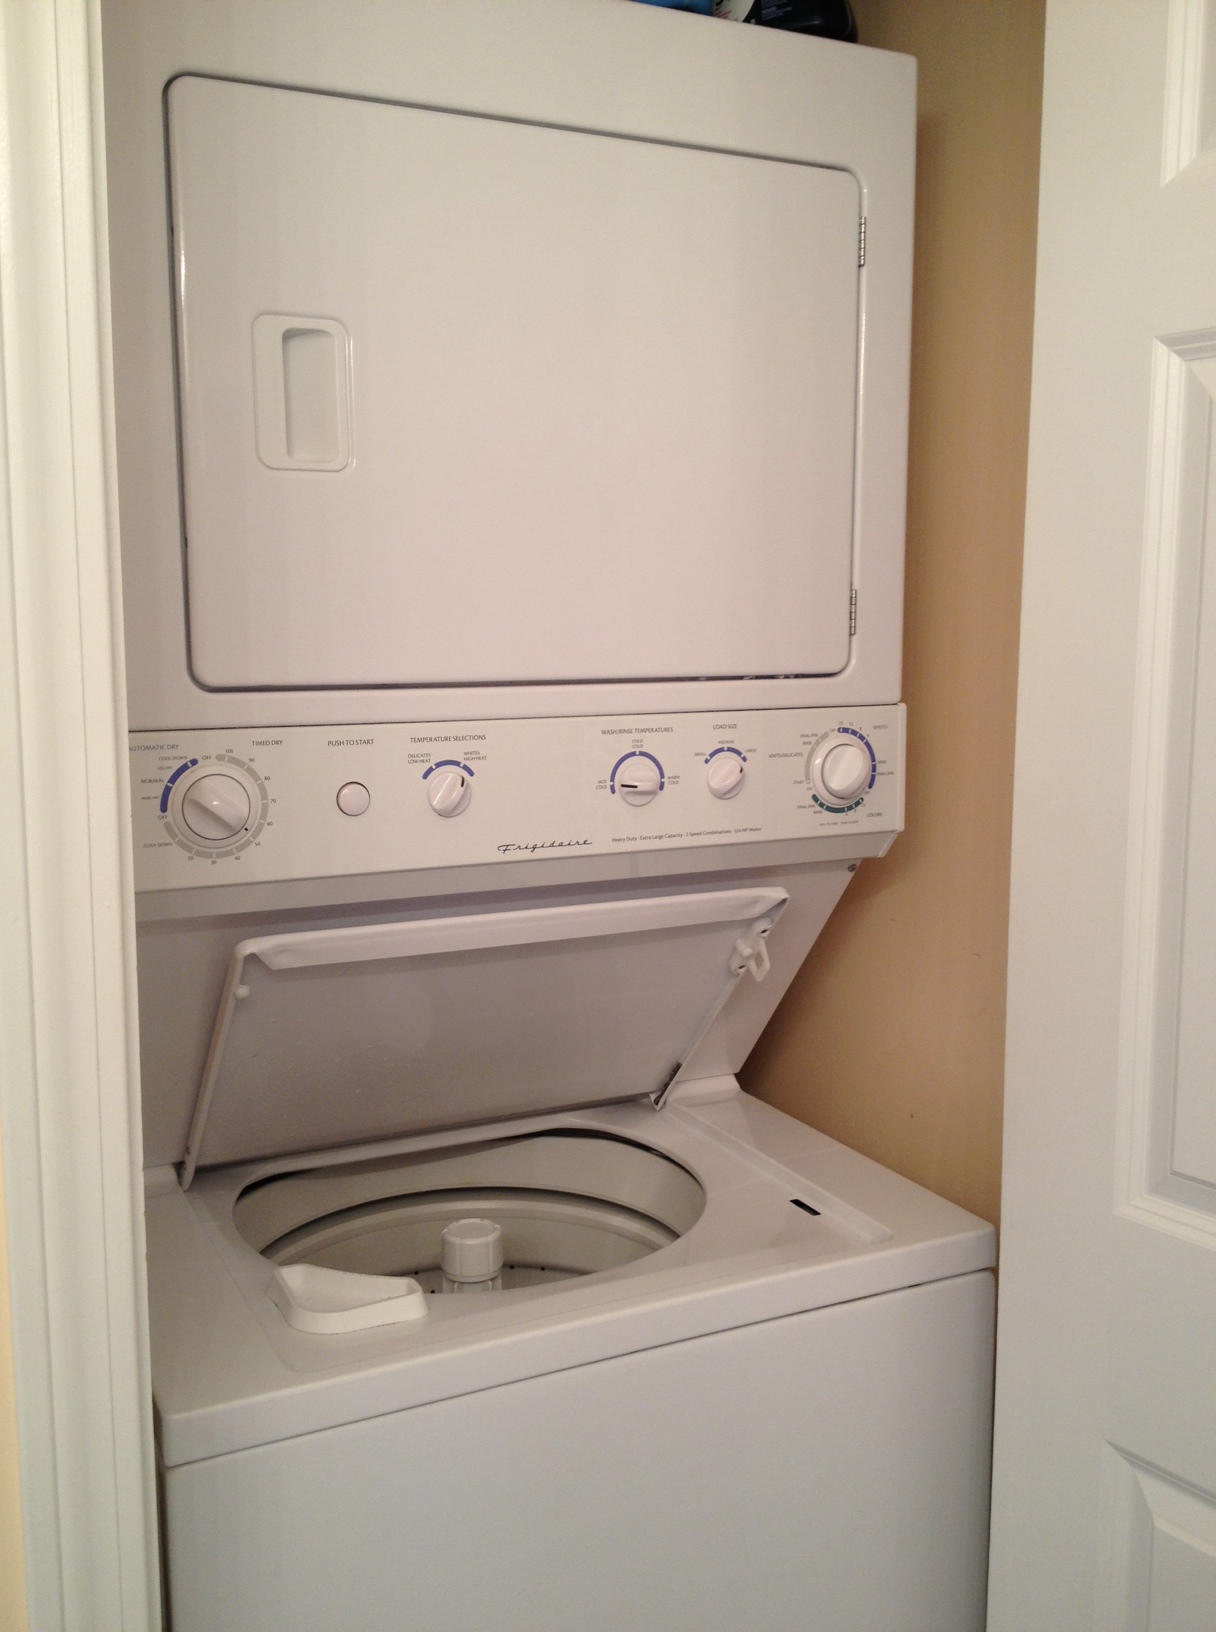 How do you install a stackable washer and dryer combo?